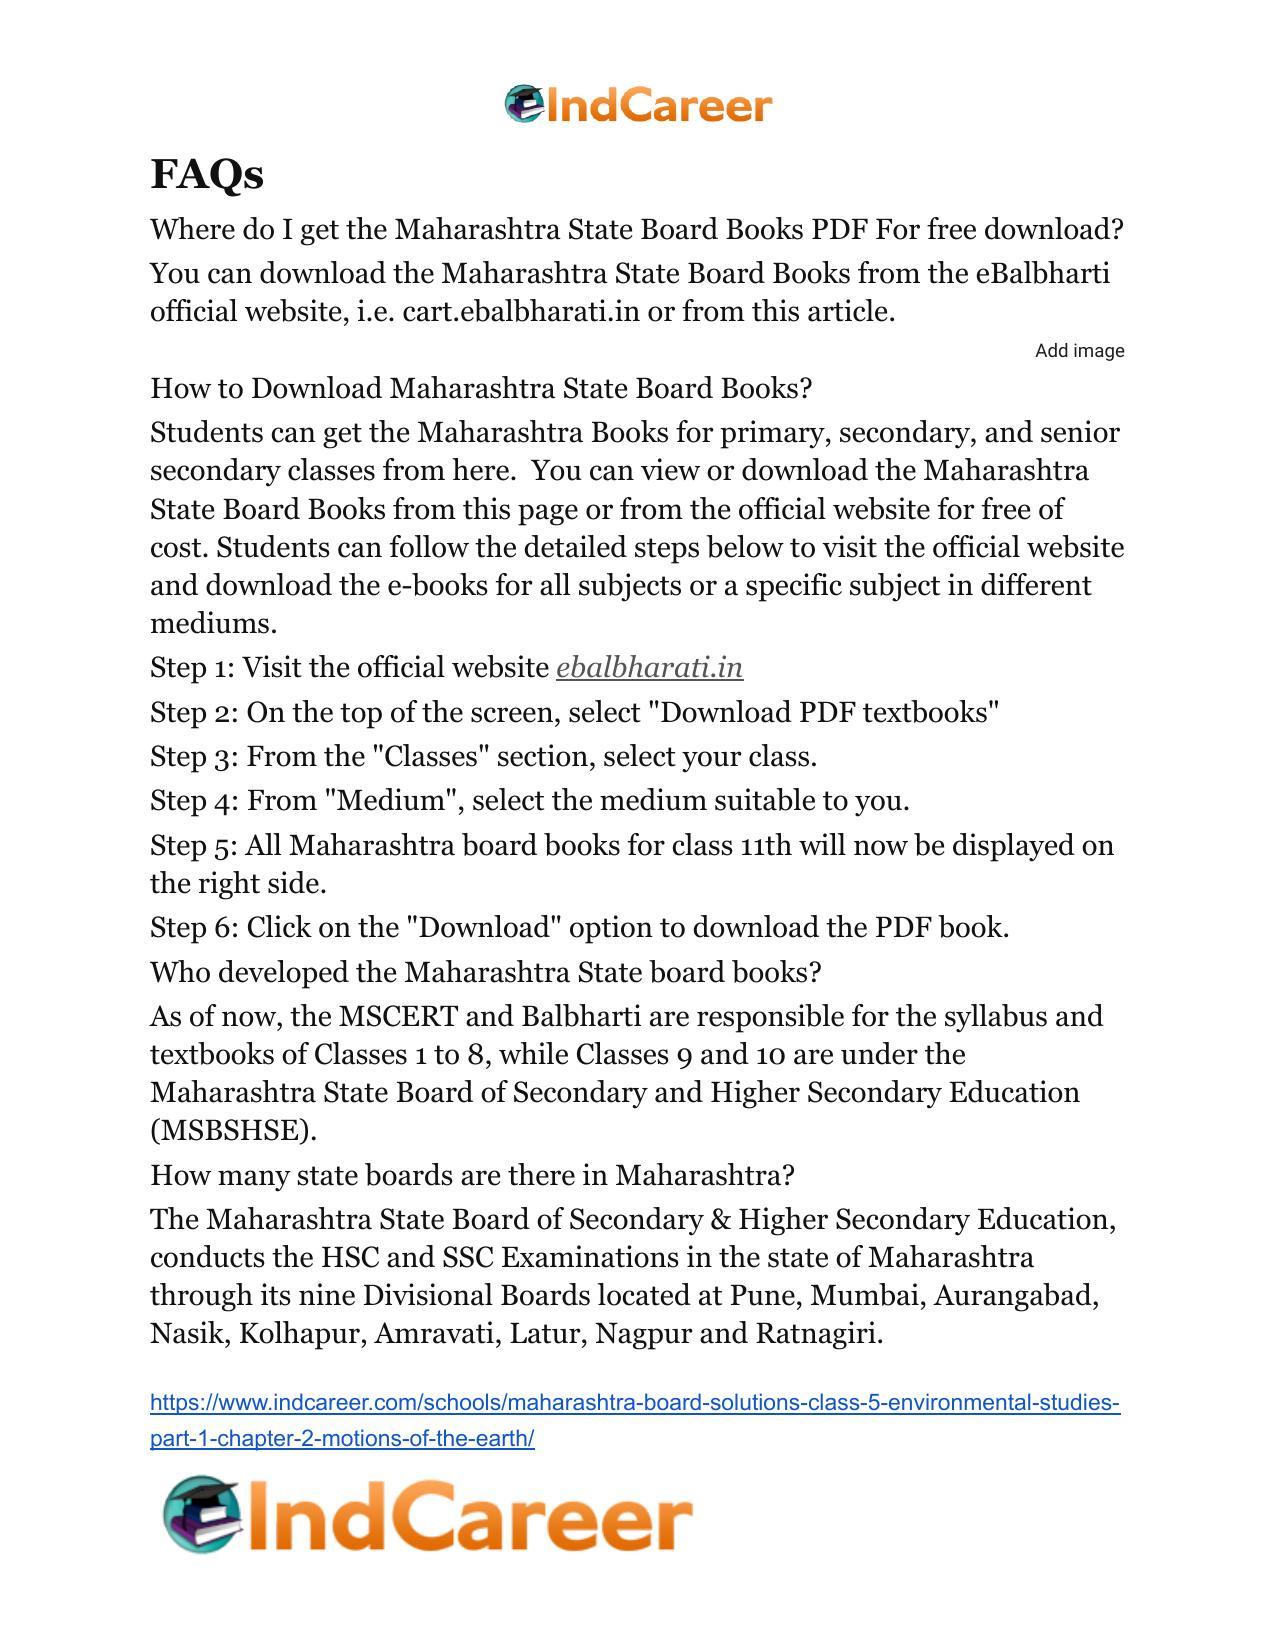 Maharashtra Board Solutions Class 5-Environmental Studies (Part 1): Chapter 2- Motions of the Earth - Page 25